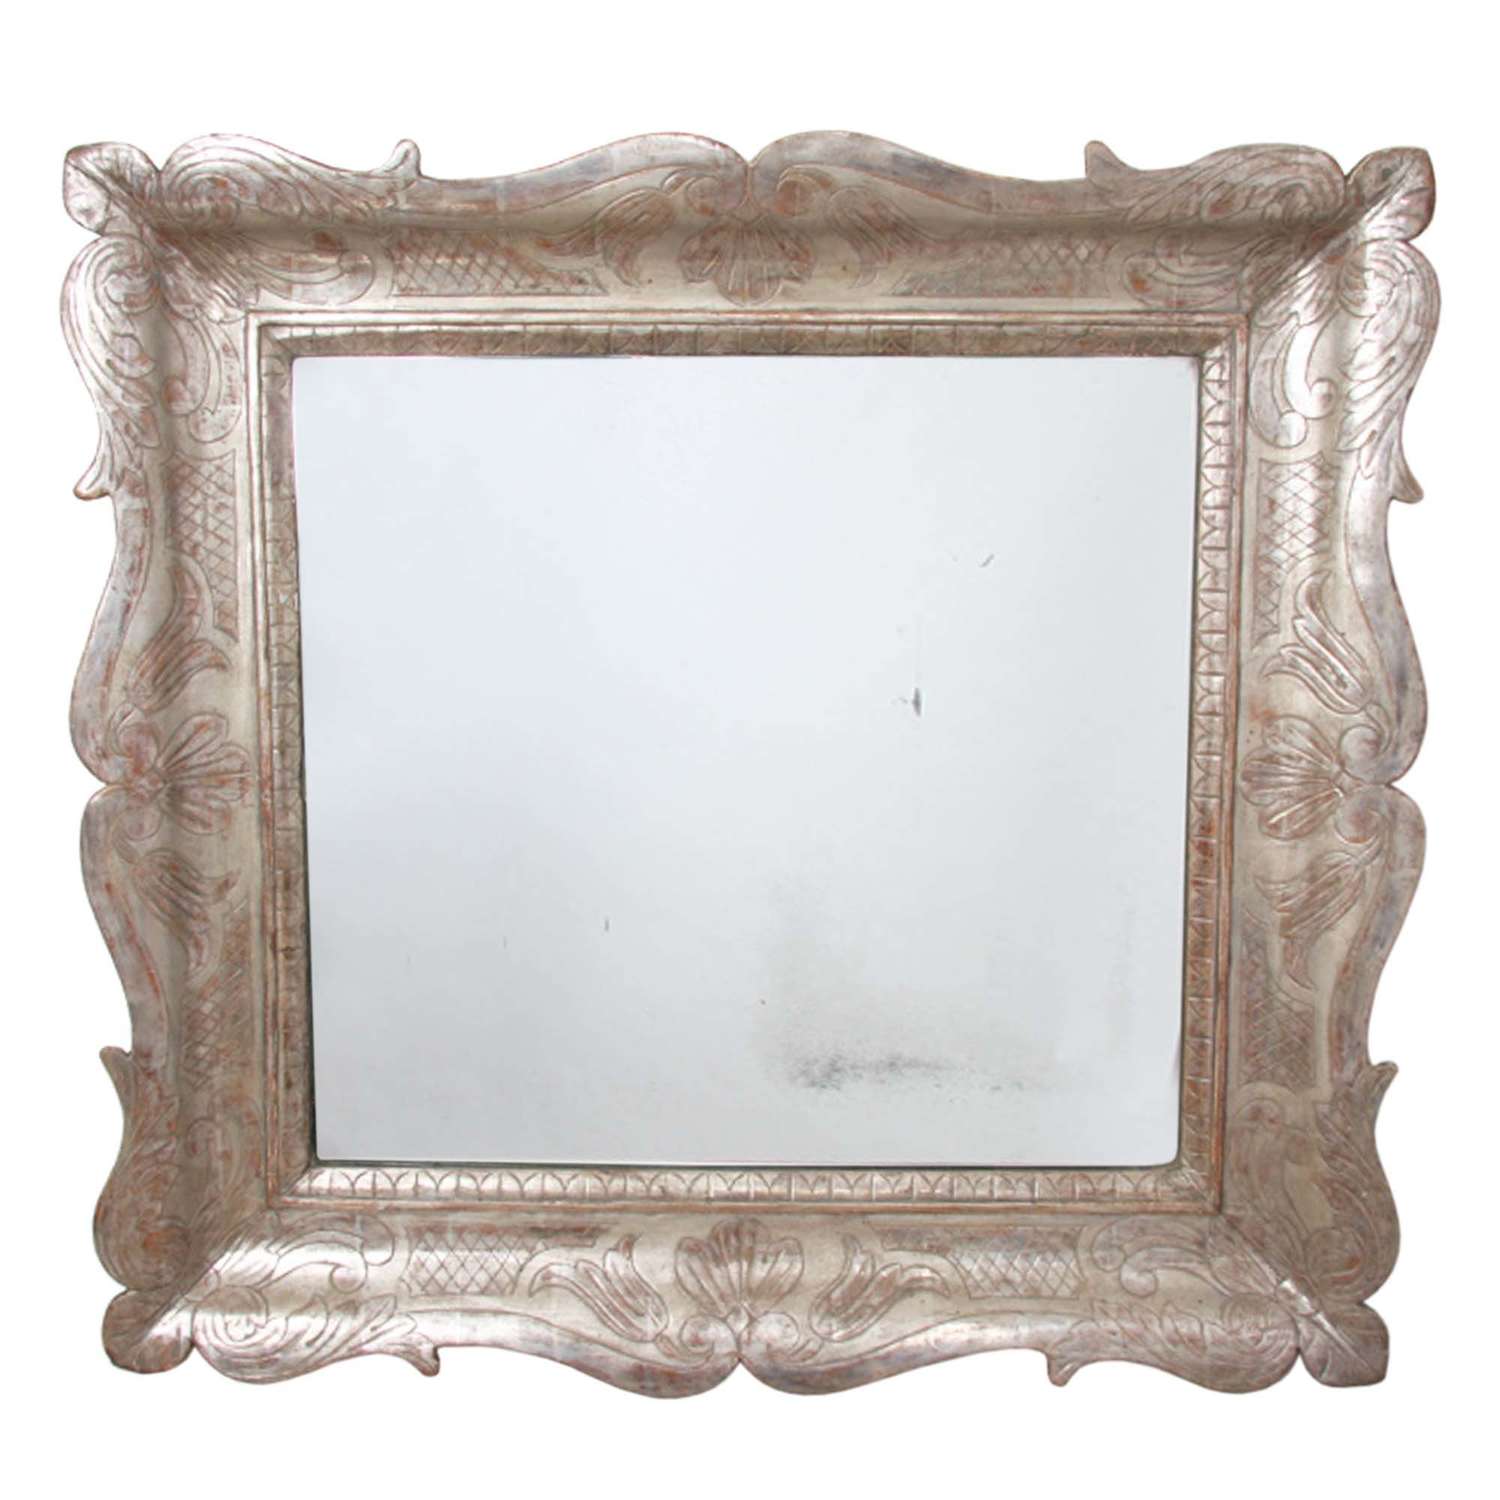 Italian 19th C Carved Wood and Silver Gilt Distressed Mirror